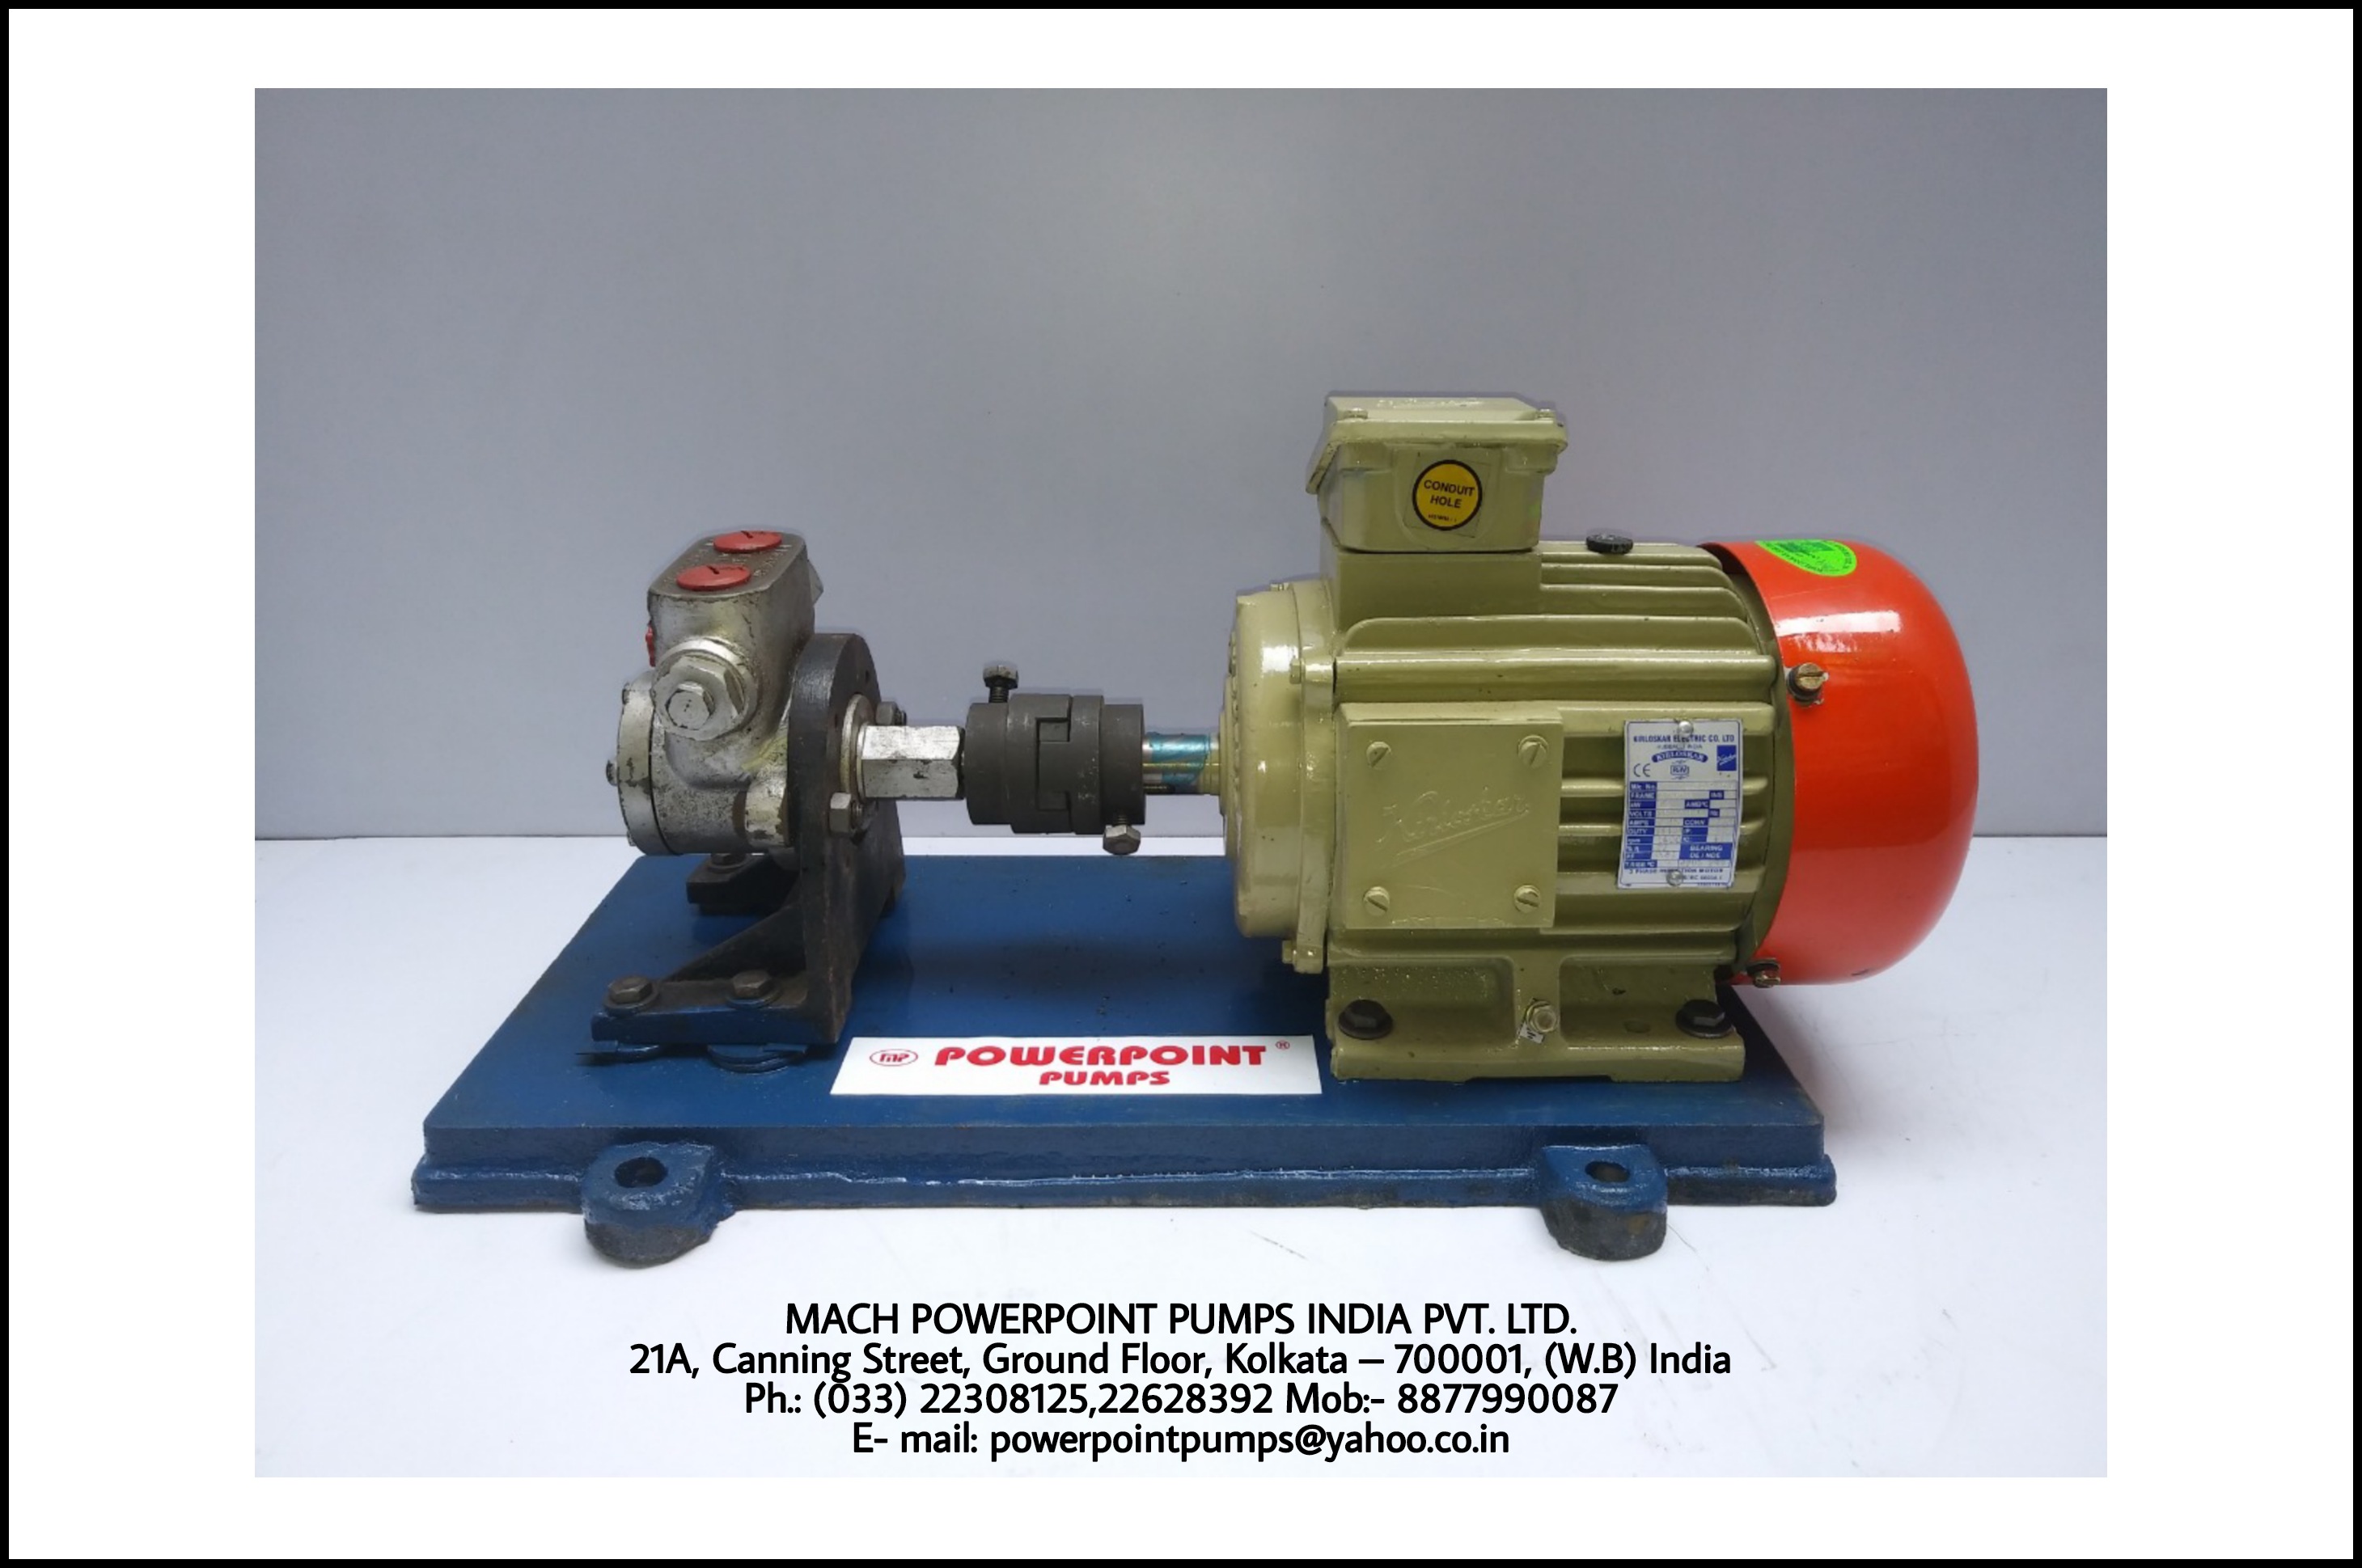 WHY USE FUEL INJECTION GEAR PUMPS? 